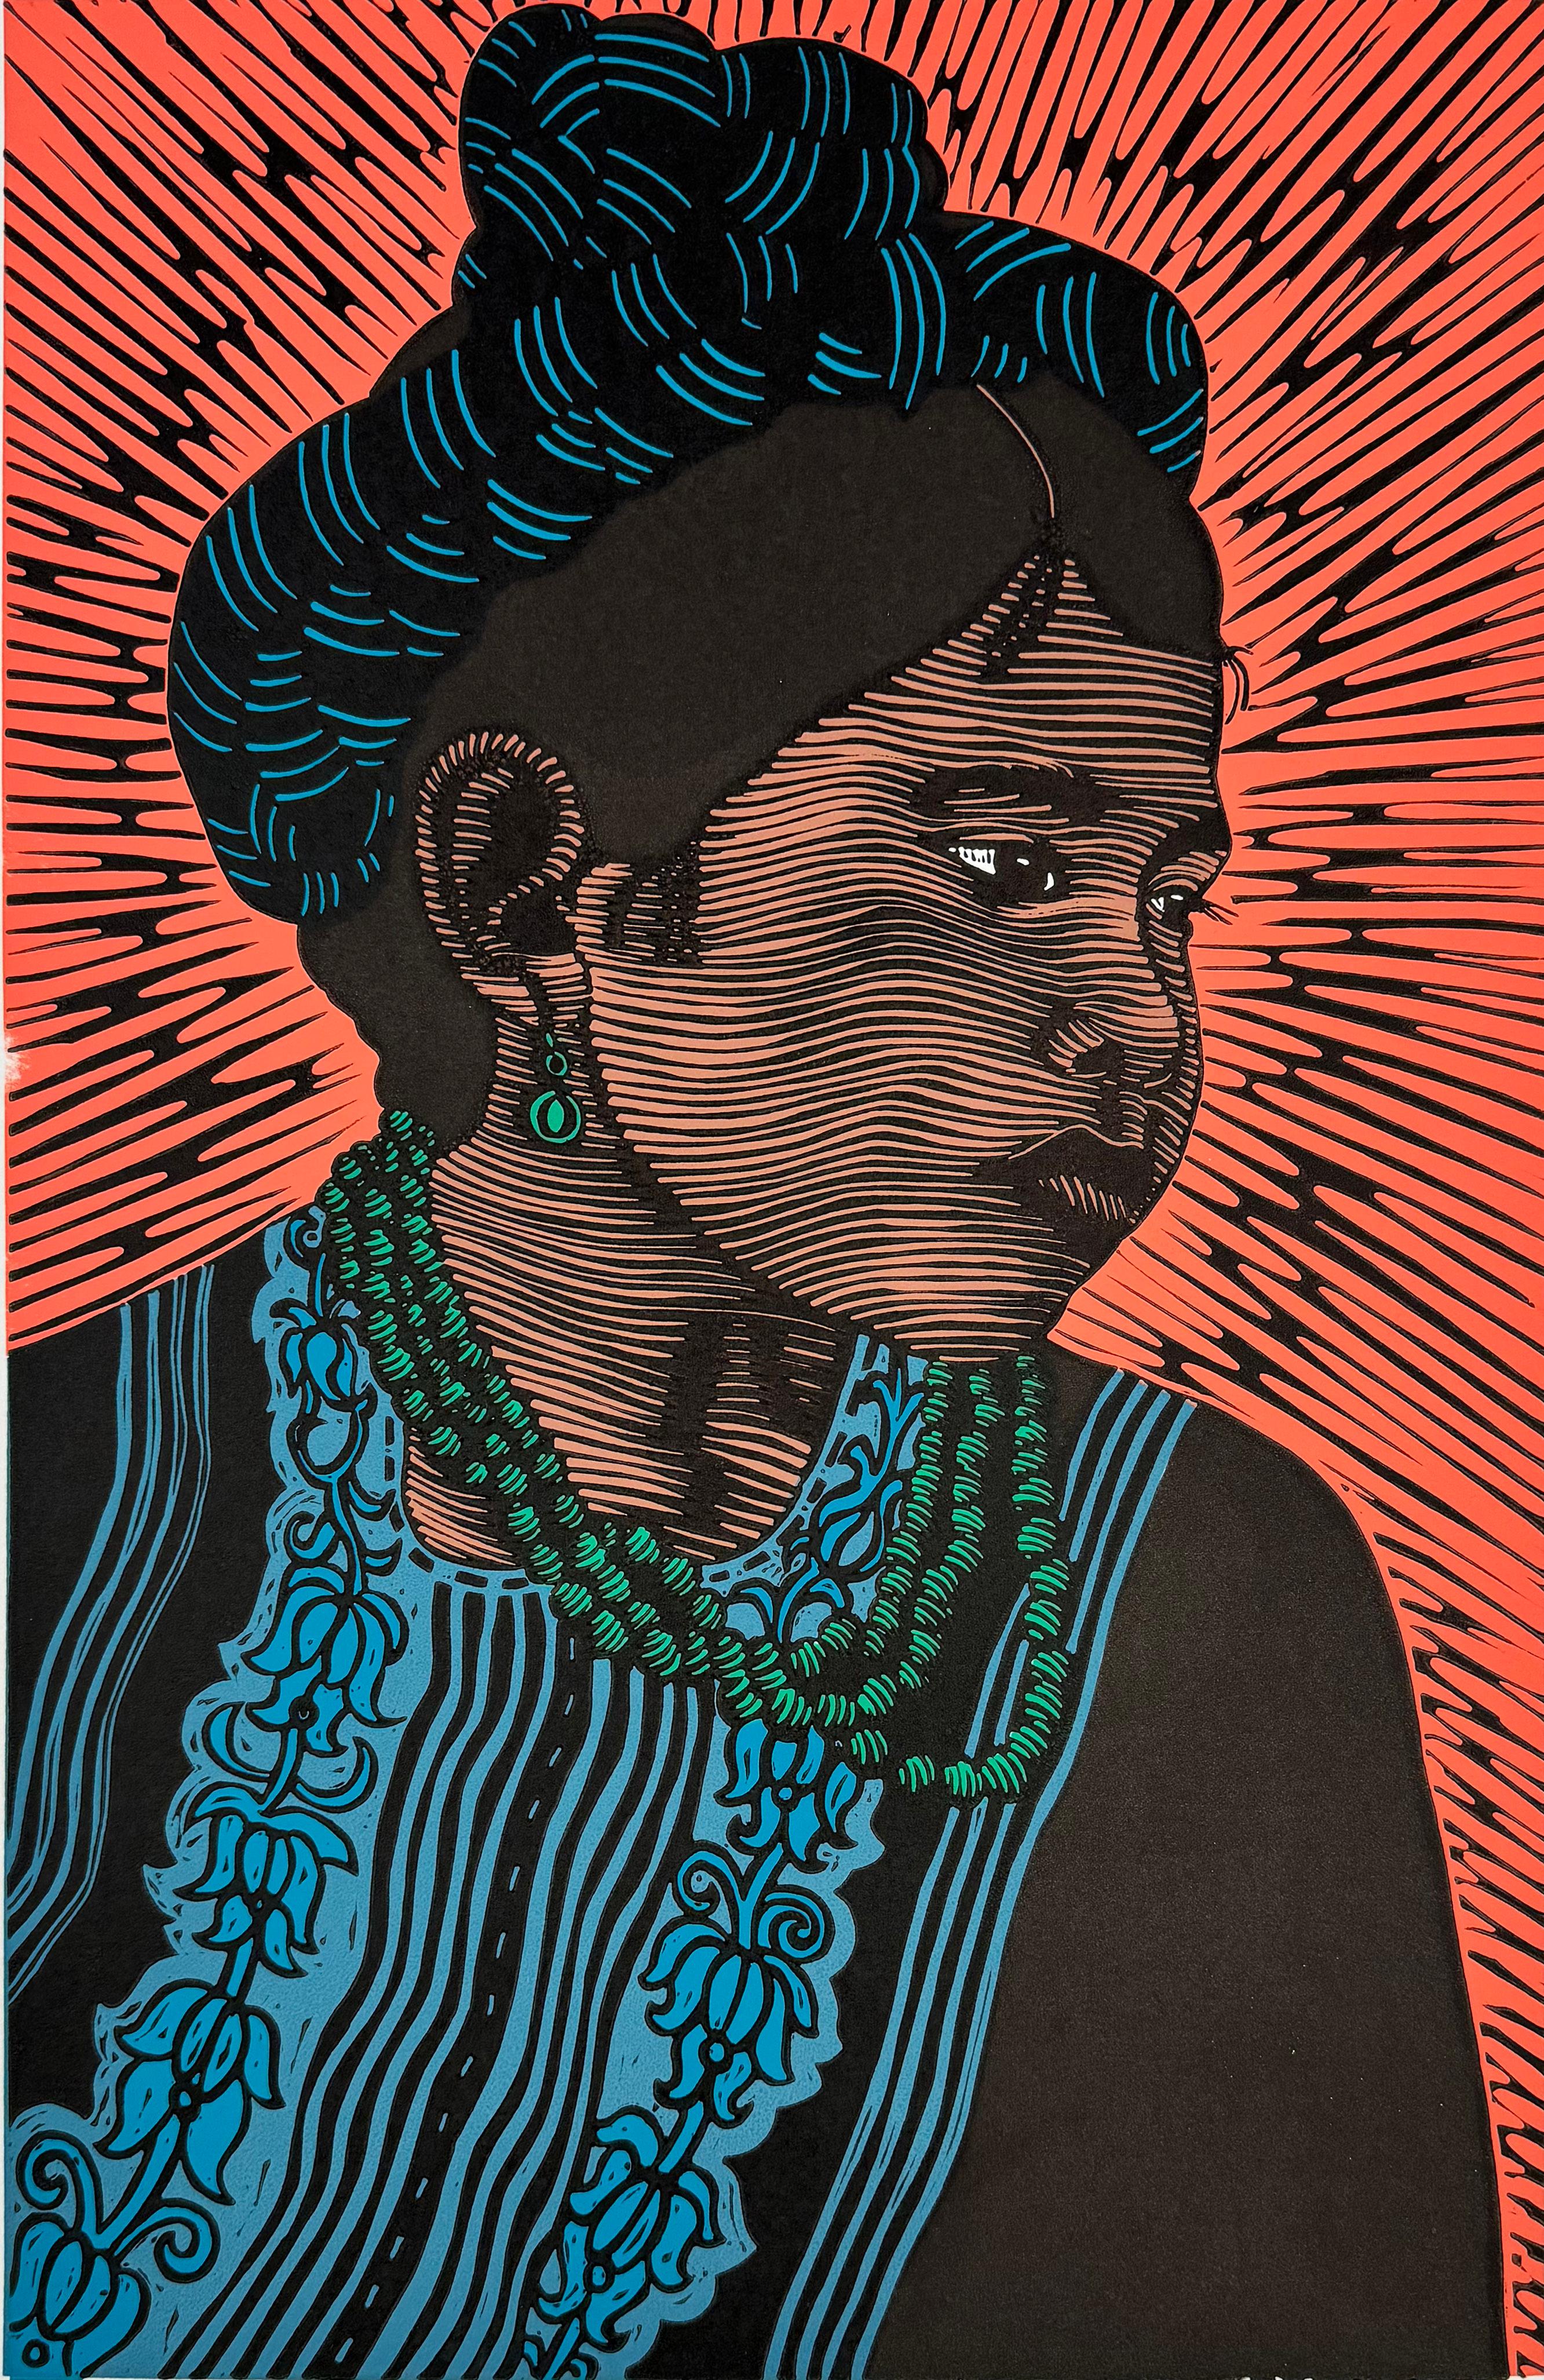 Medium: linocut
Year: 2016
Image Size: 18 x 12 inches
Edition Size: 20

Young girl in indigenous dress and jewelry.

As a cultural activist/artist/printmaker, Juan Fuentes has dedicated his career to being part of a global movement for social